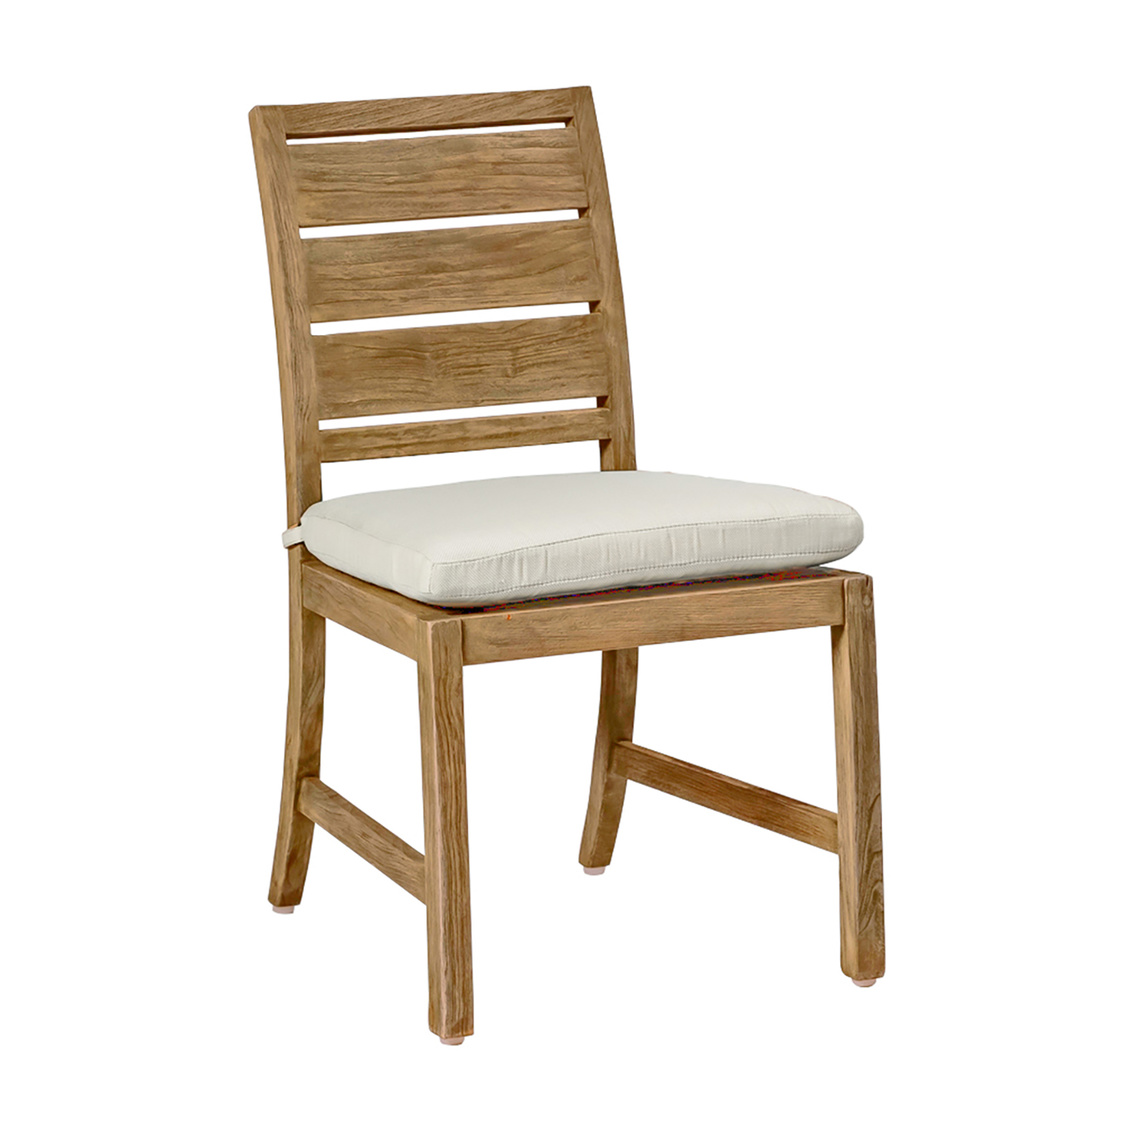 charleston teak side chair in natural teak – frame only product image